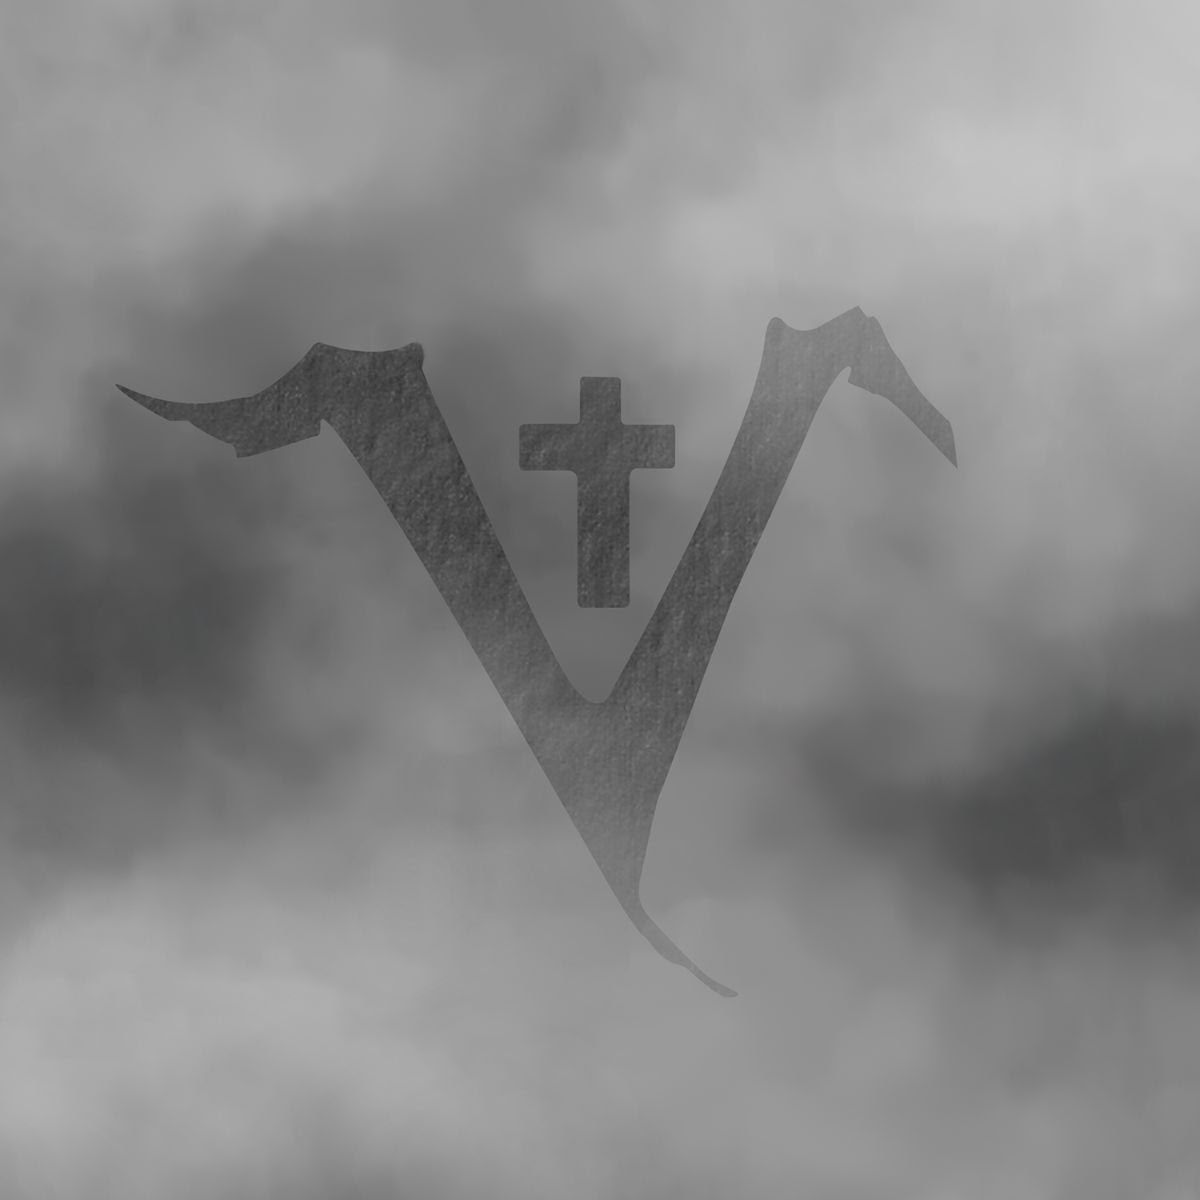 Saint Vitus announce new album, release single “12 Years In The Tomb”